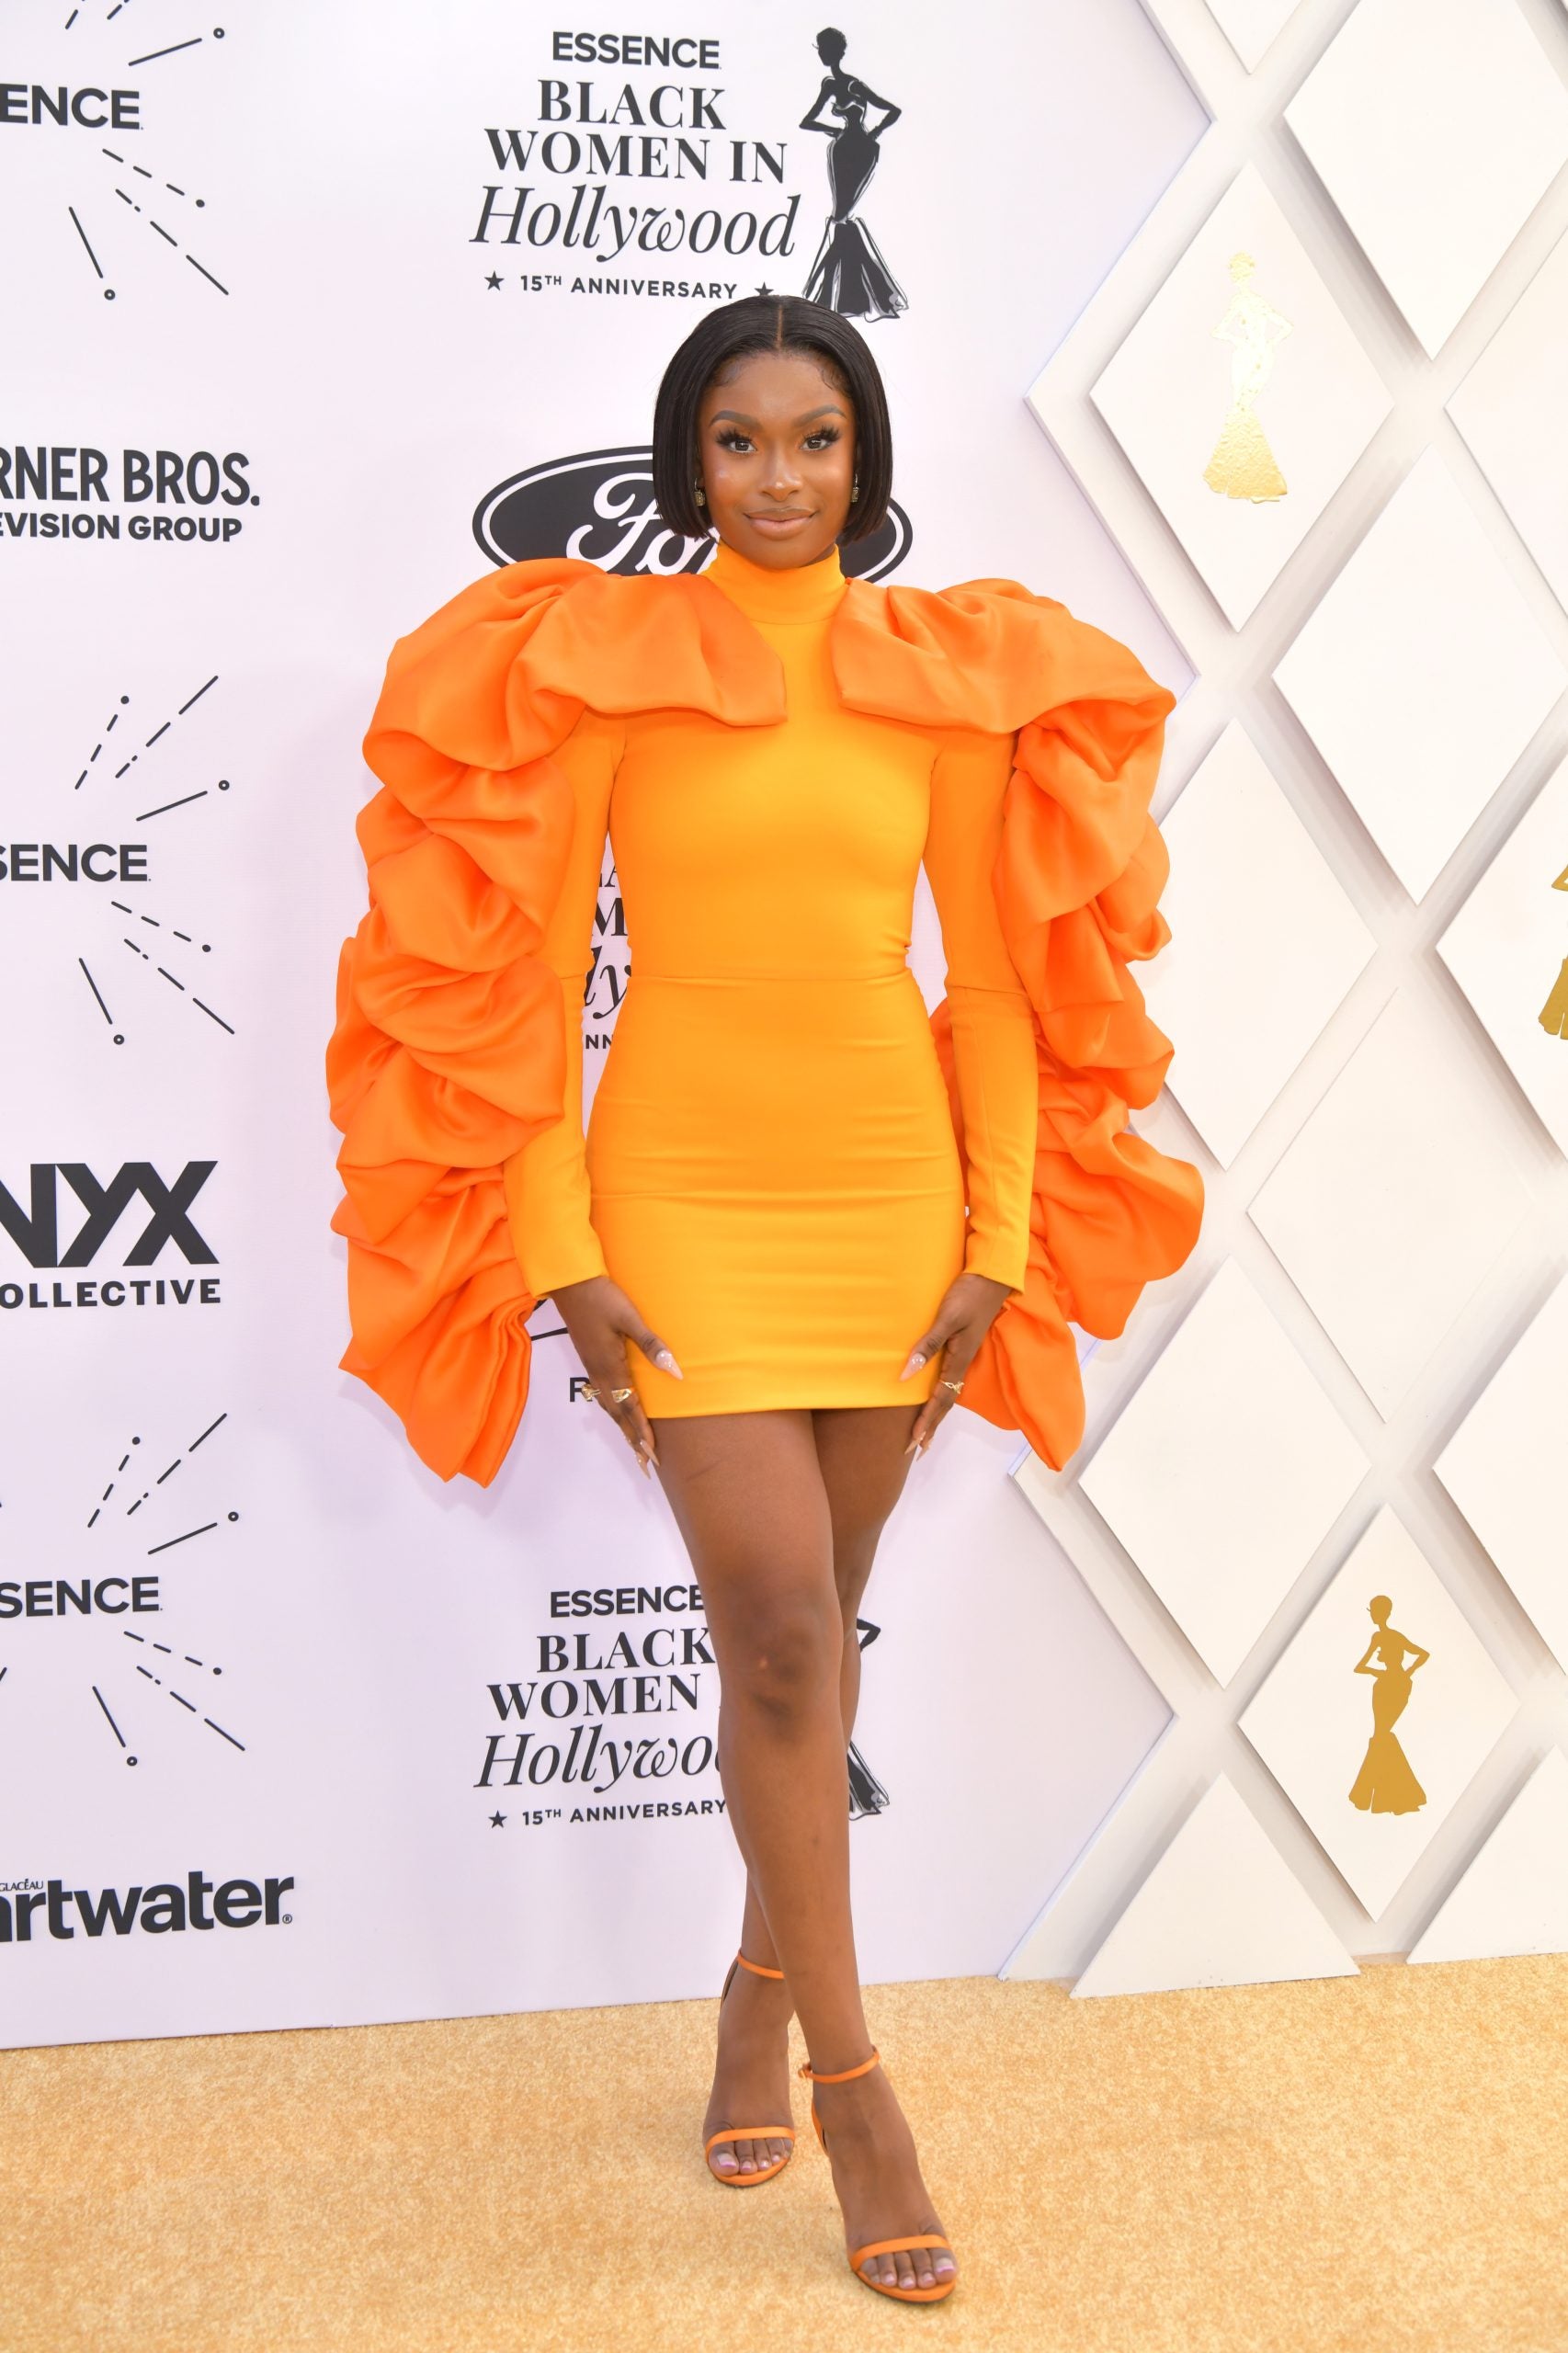 WATCH: See The Stars Who Electrified The Red Carpet At The 2022 Black Women In Hollywood Awards